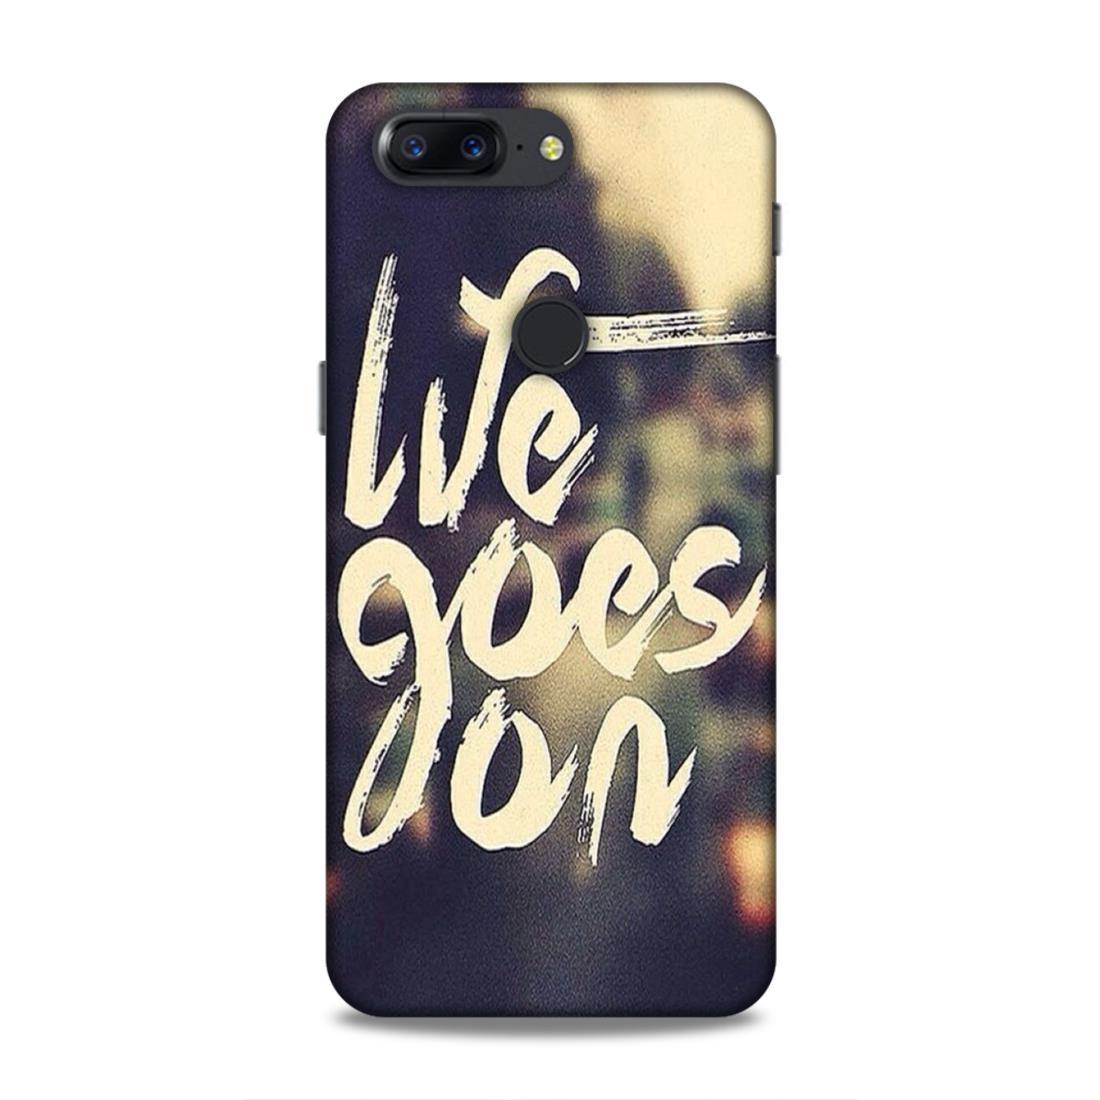 Life Goes On OnePlus 5T Mobile Cover Case